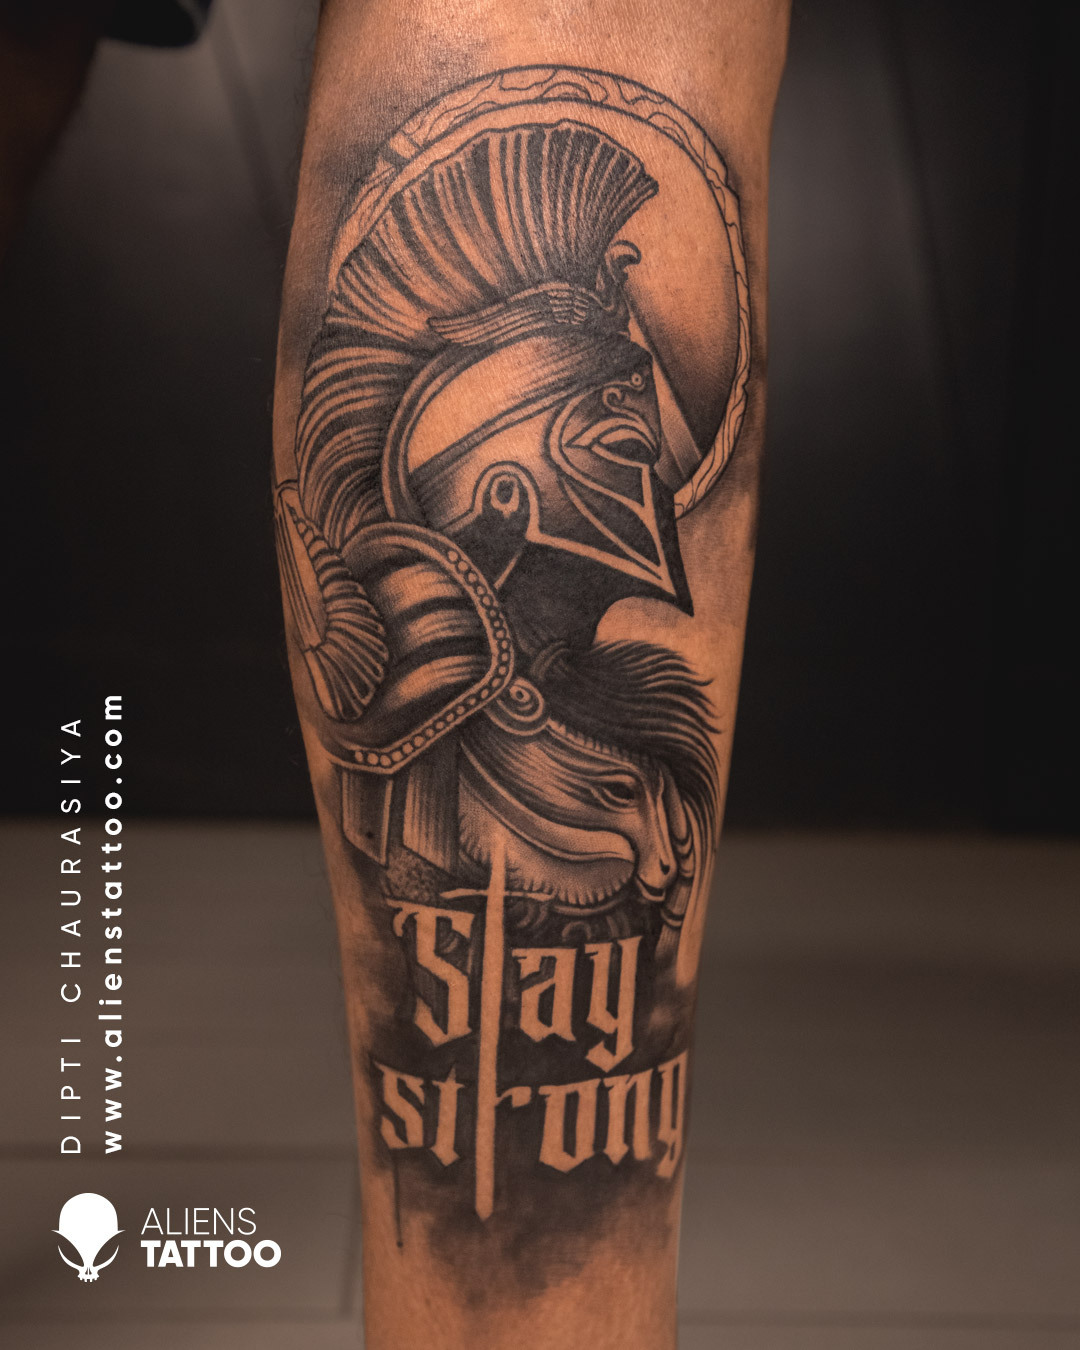 B Tattoo Shop on Tumblr: Script Tattoo by Vishal Maurya at Aliens Tattoo  India La vie est belle is a French expression meaning life is beautiful ,  This...